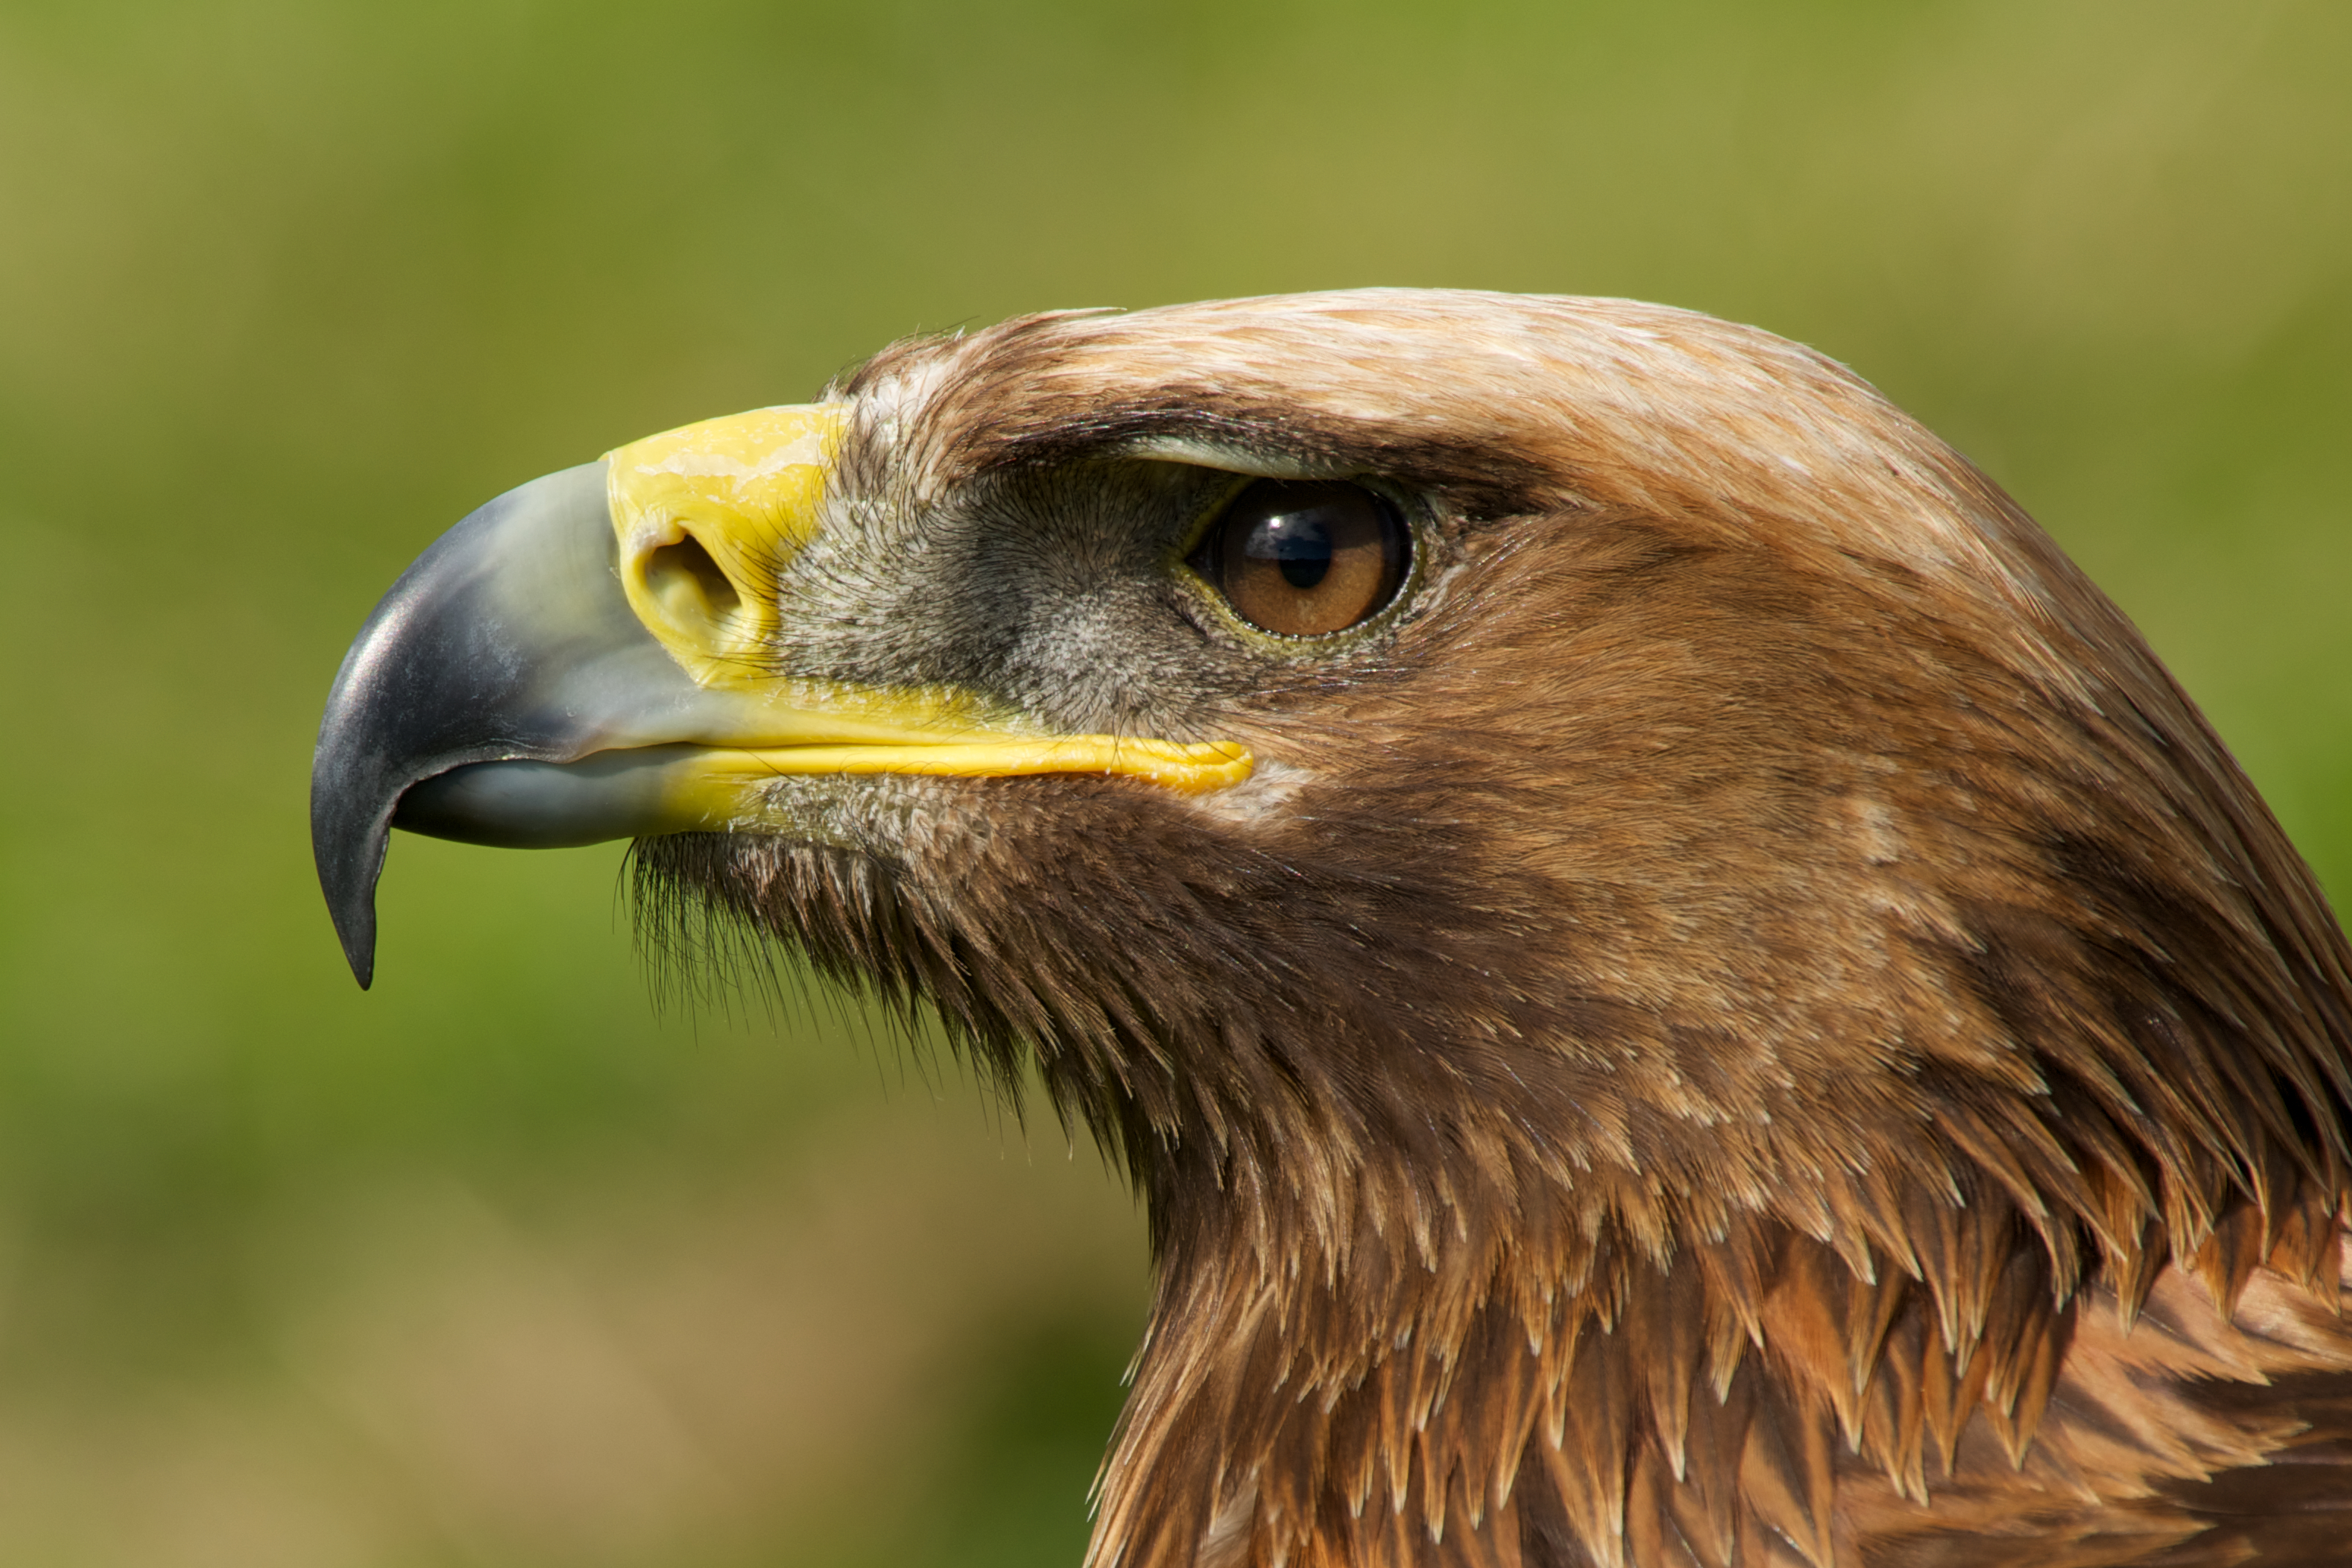 Close-up of golden eagle head with catchlight | Nick Dale's Blog